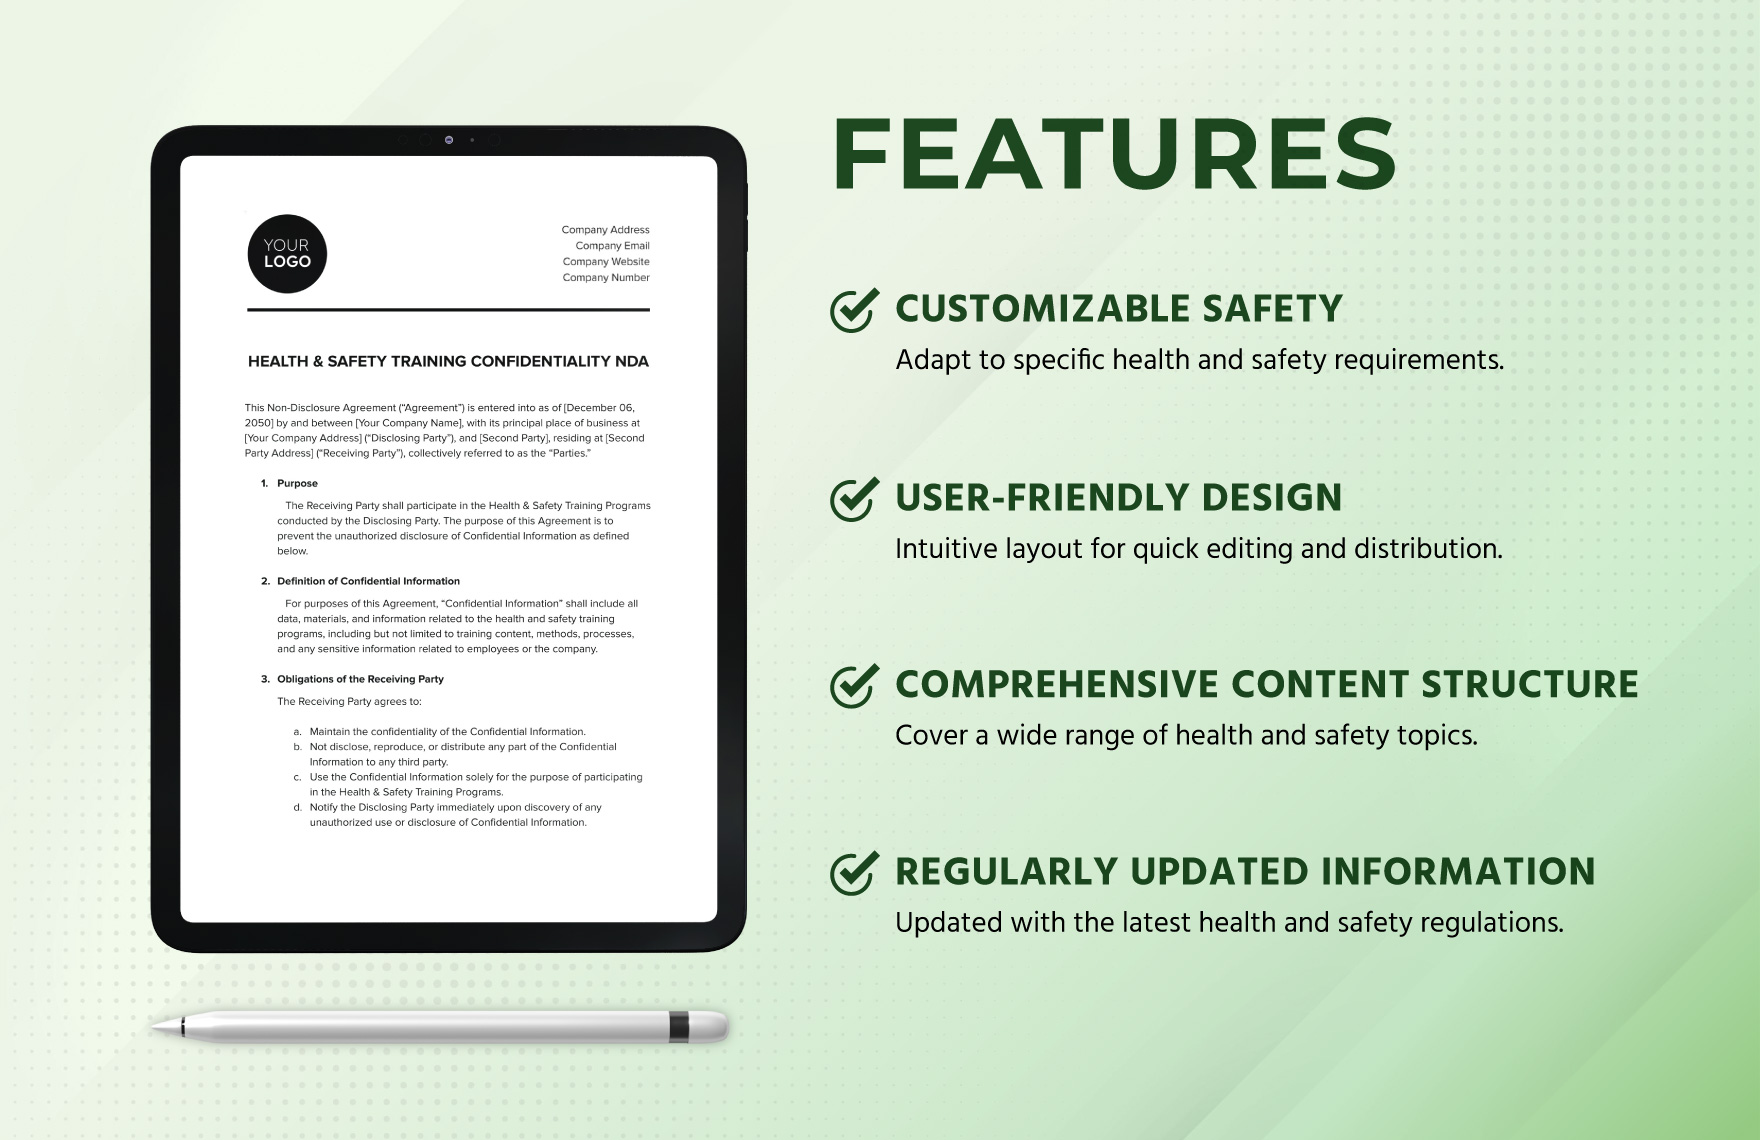 Health & Safety Training Confidentiality NDA Template